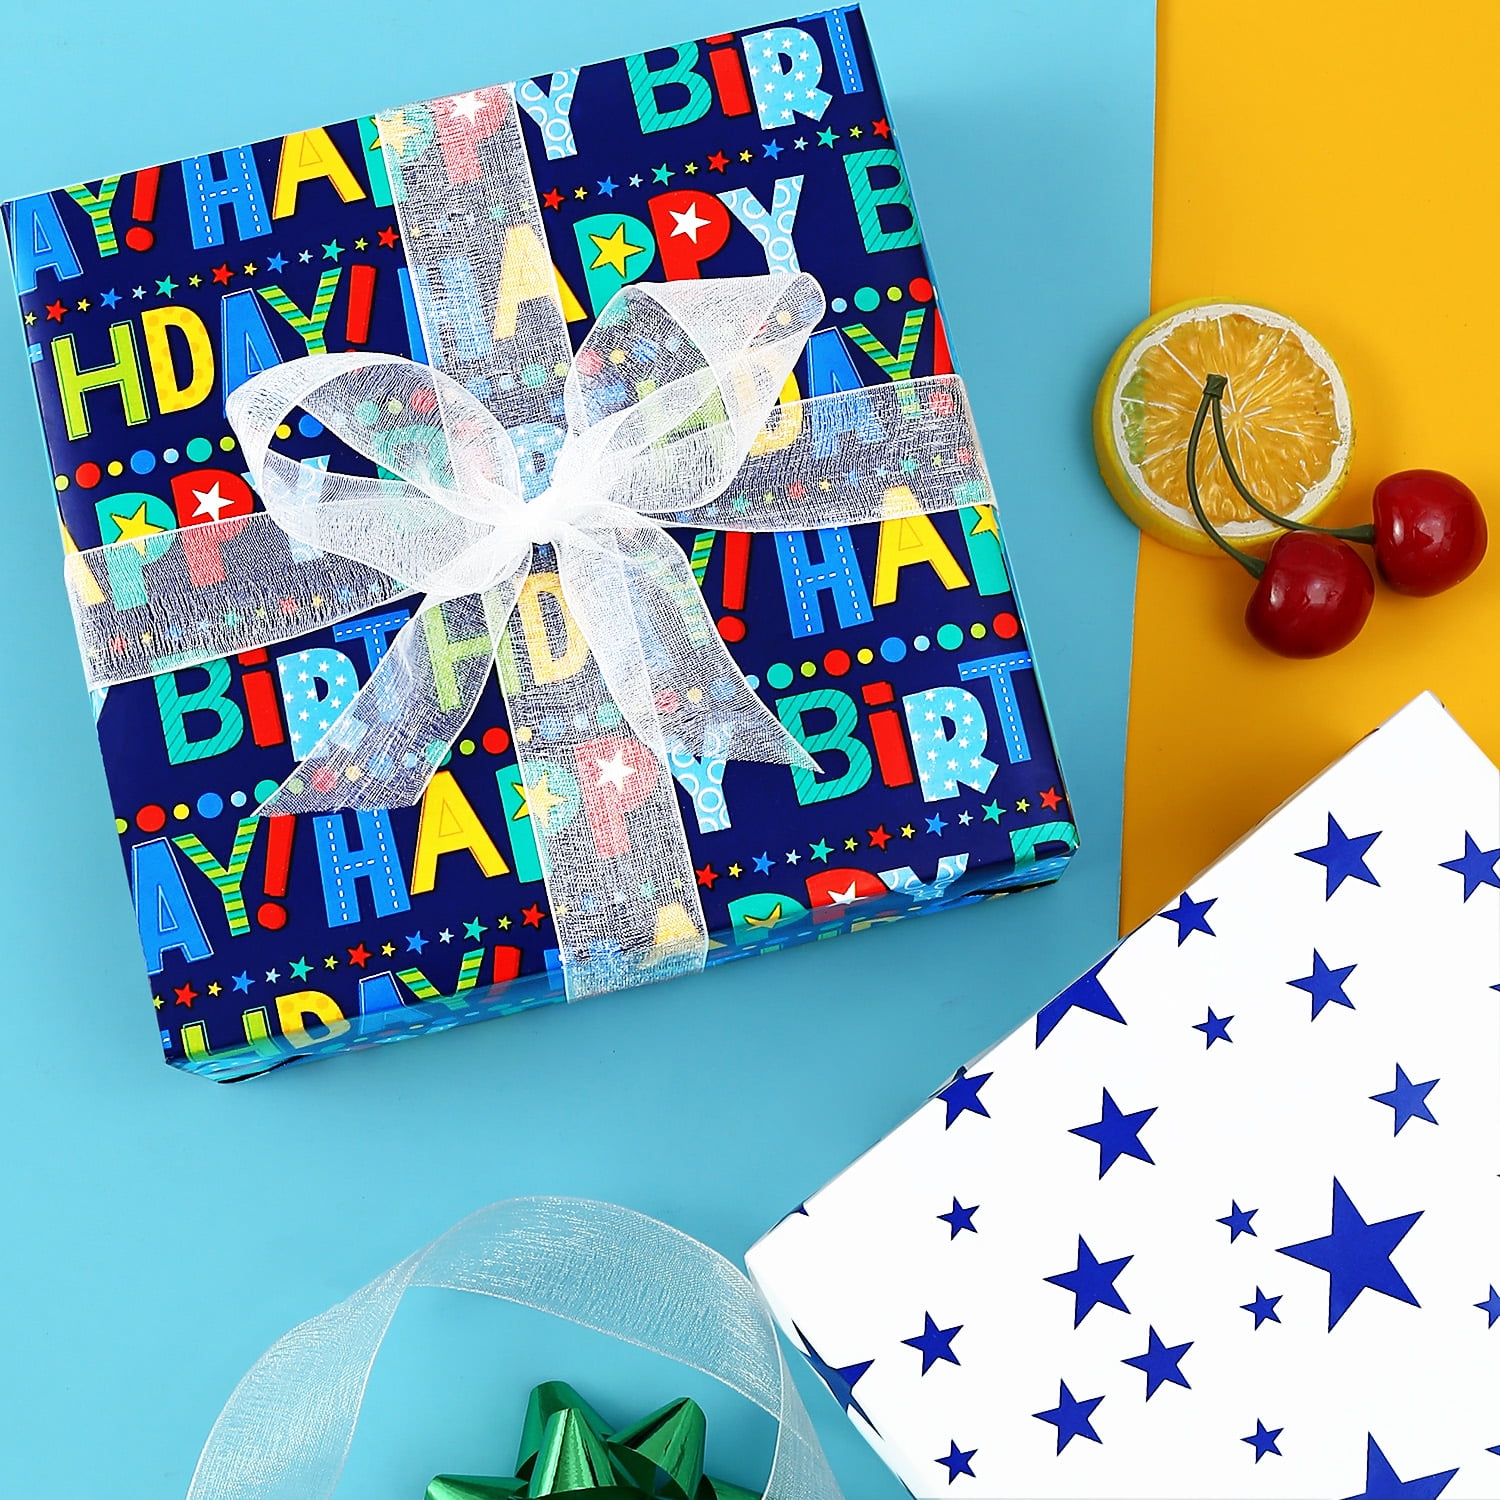 Blavermant Birthday Wrapping paper rolls, Gift Wrapping Paper Mini Roll -  17 X 16.4 ft Per roll, 3 Colorful Designs for Birthday